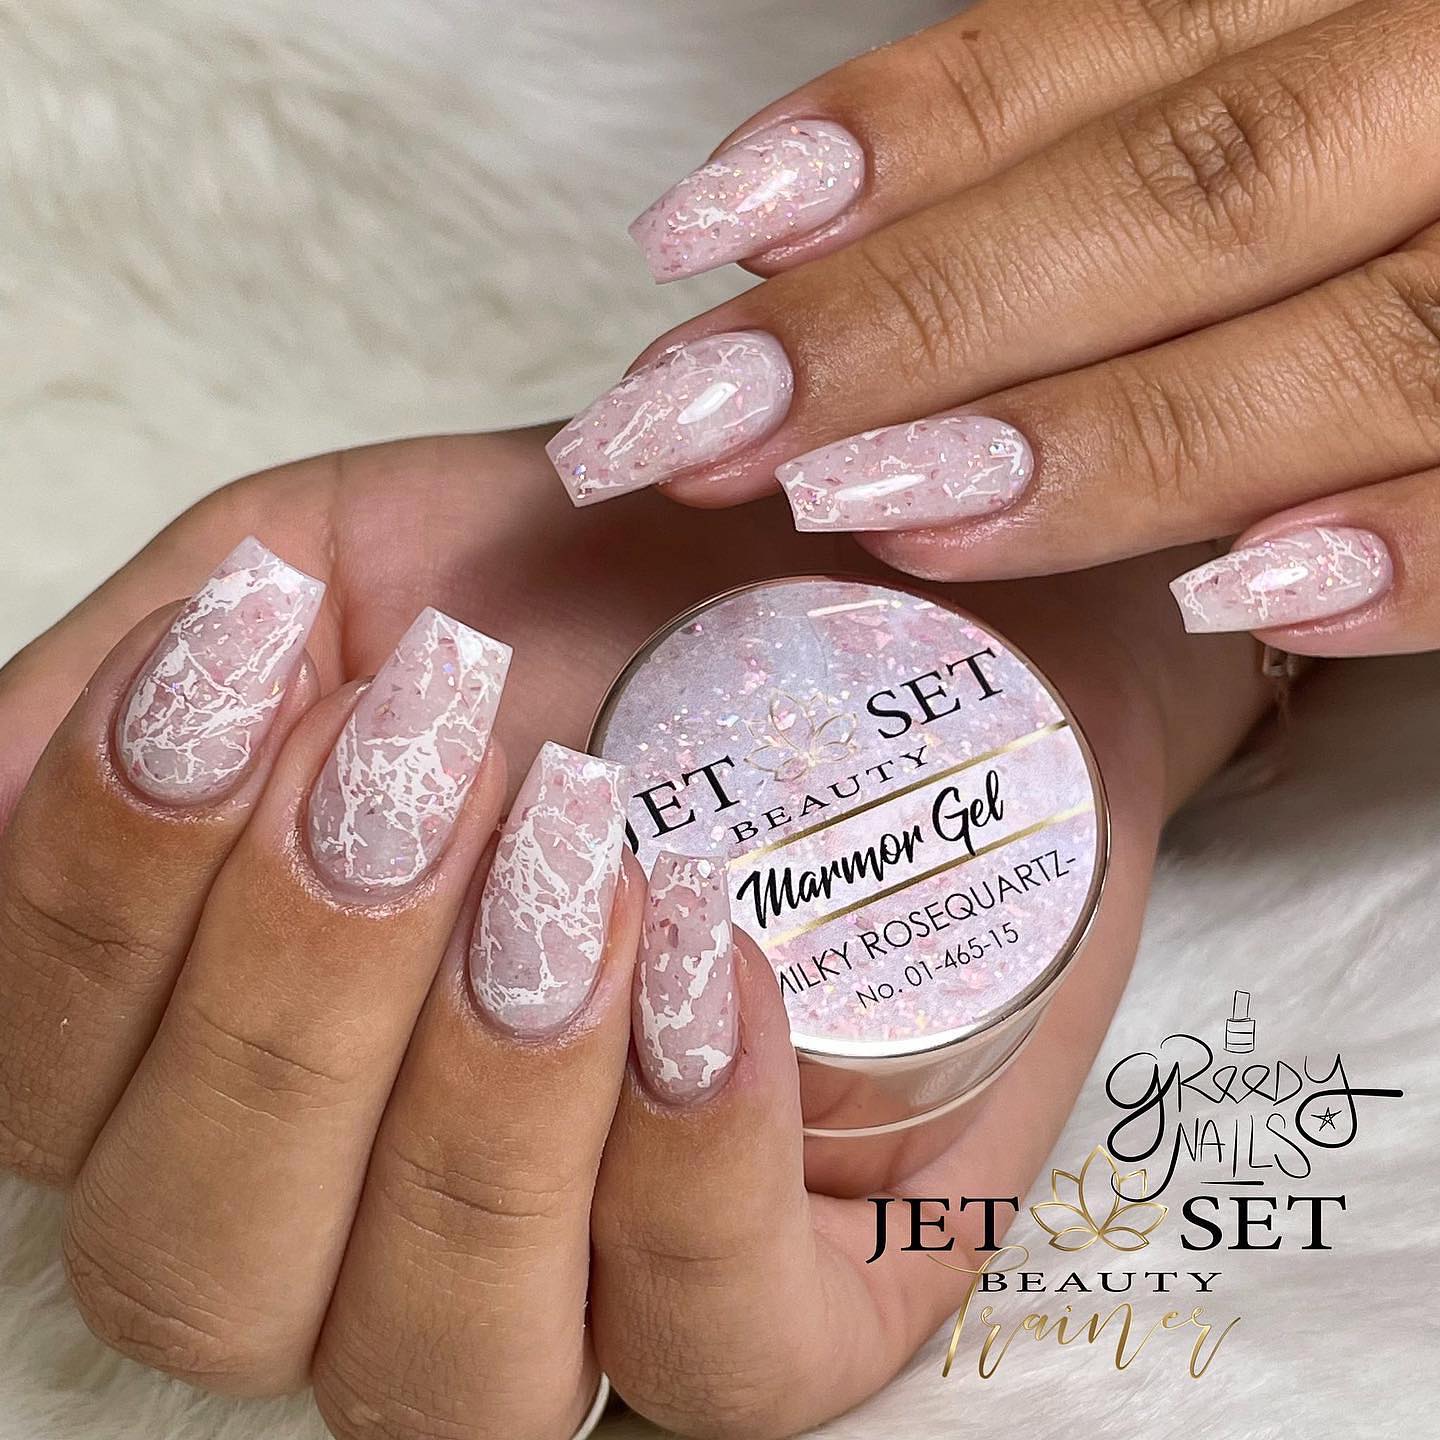 Nude Manicure with White Marble Design on Coffin Nails